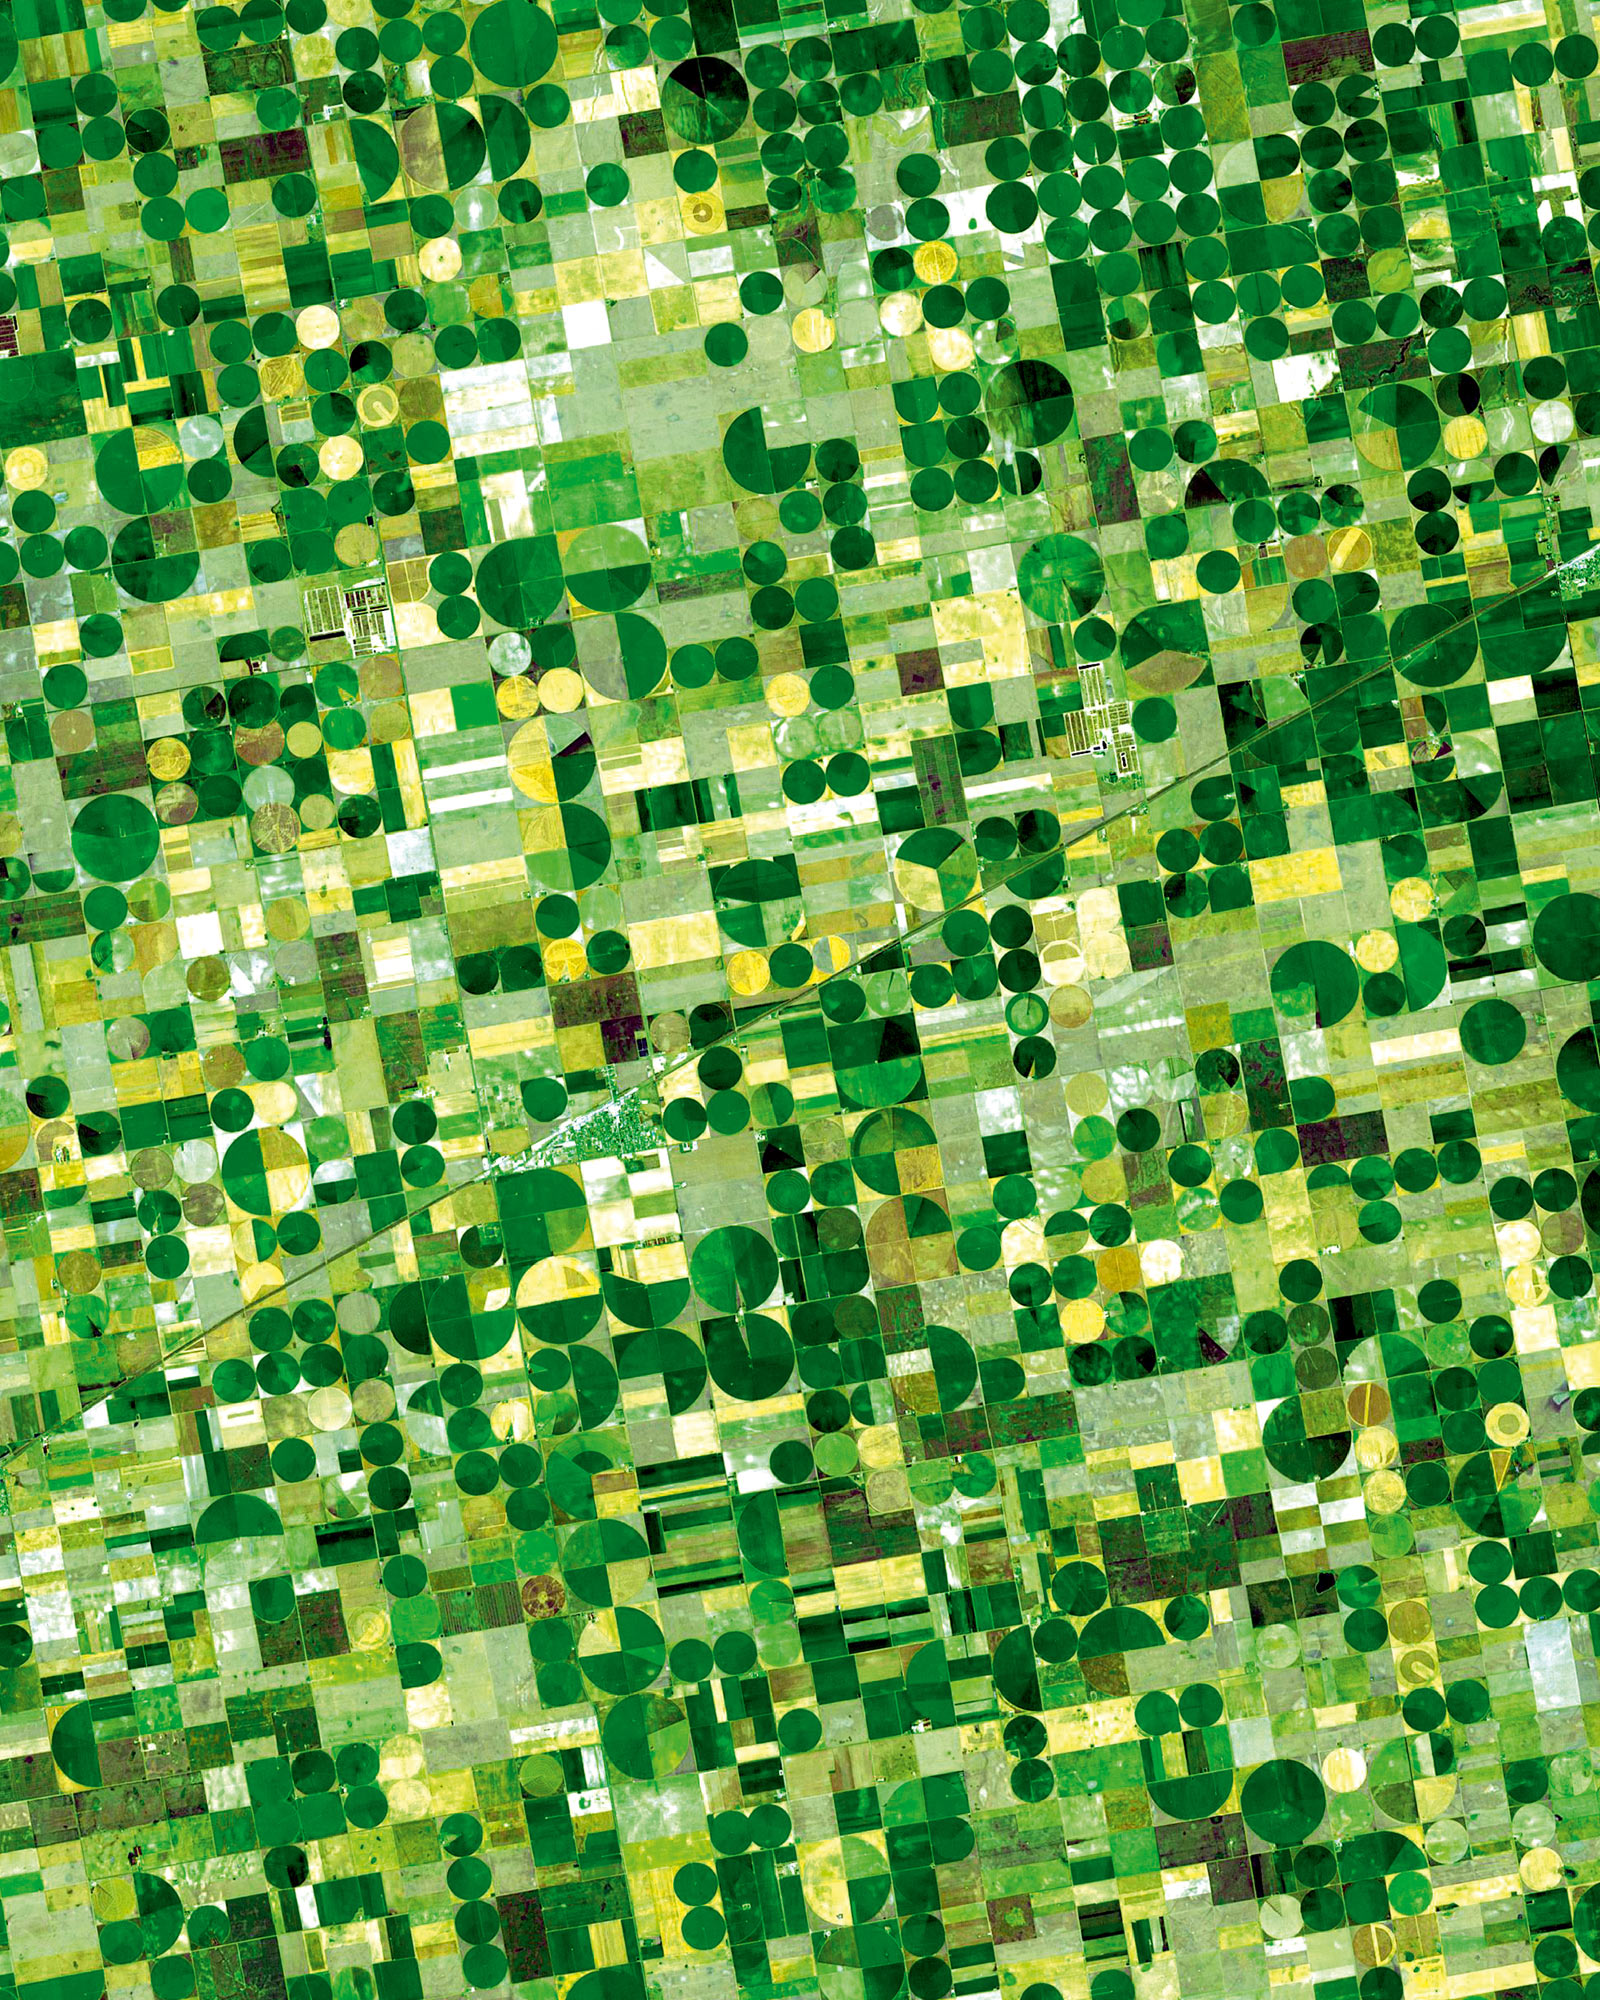 Crops in Finney County, Kansas, seen in a NASA image taken on the 24th of June two thousand and one. The water for the fields is drawn from Ogallala Aquifer, which lies under circa 175,000 square miles of the Great Plains. Farmers in the region have adopted the highly efficient method of central pivot irrigation, drawing water out of a single well in the center of the field.